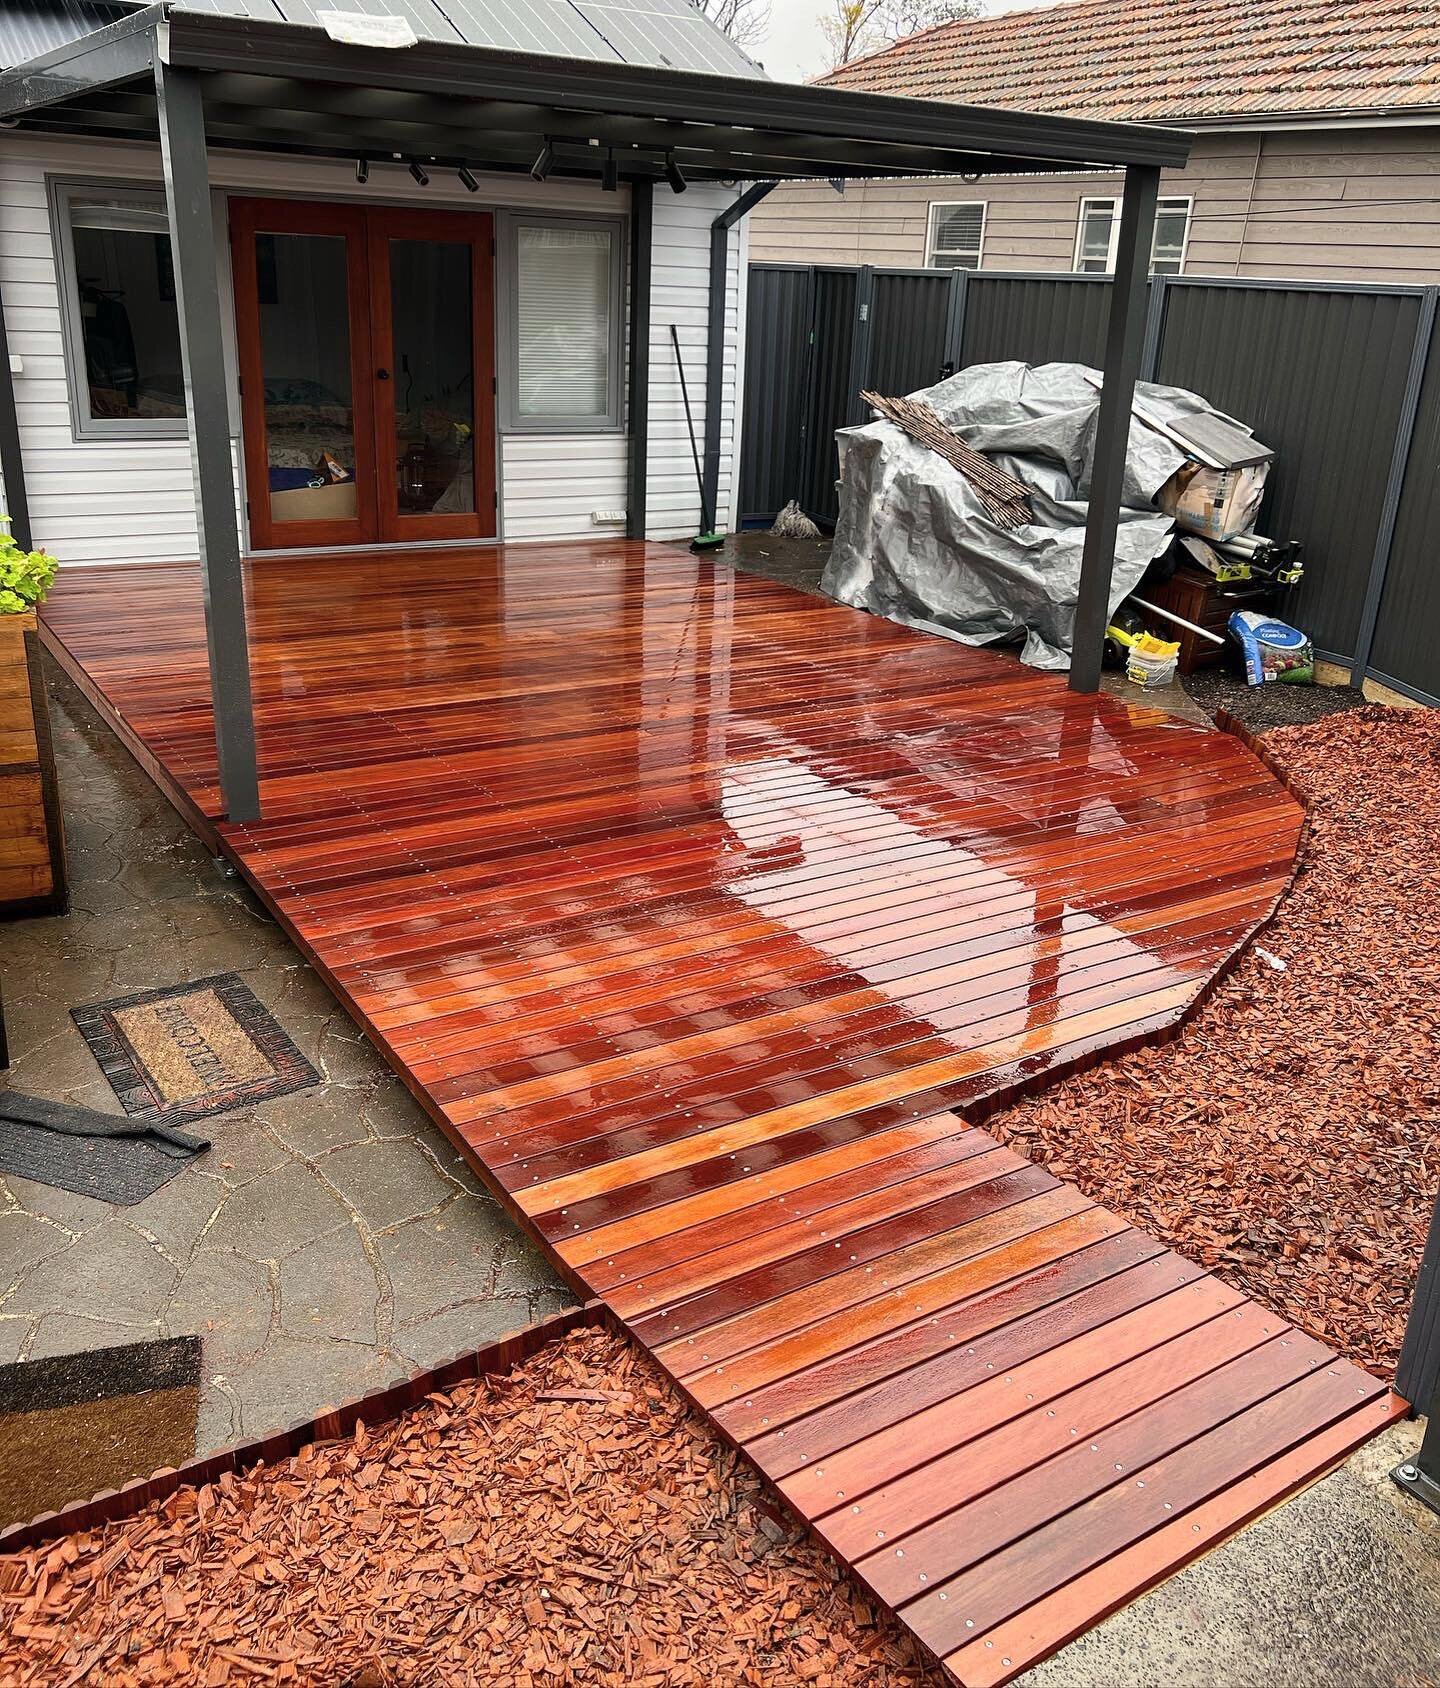 Our recently completed project for @creed_construction 

We were asked to construct and lay a new backyard deck for this client which turned out a treat! 

Swipe through to see the before and after photos of this deck ➡️➡️